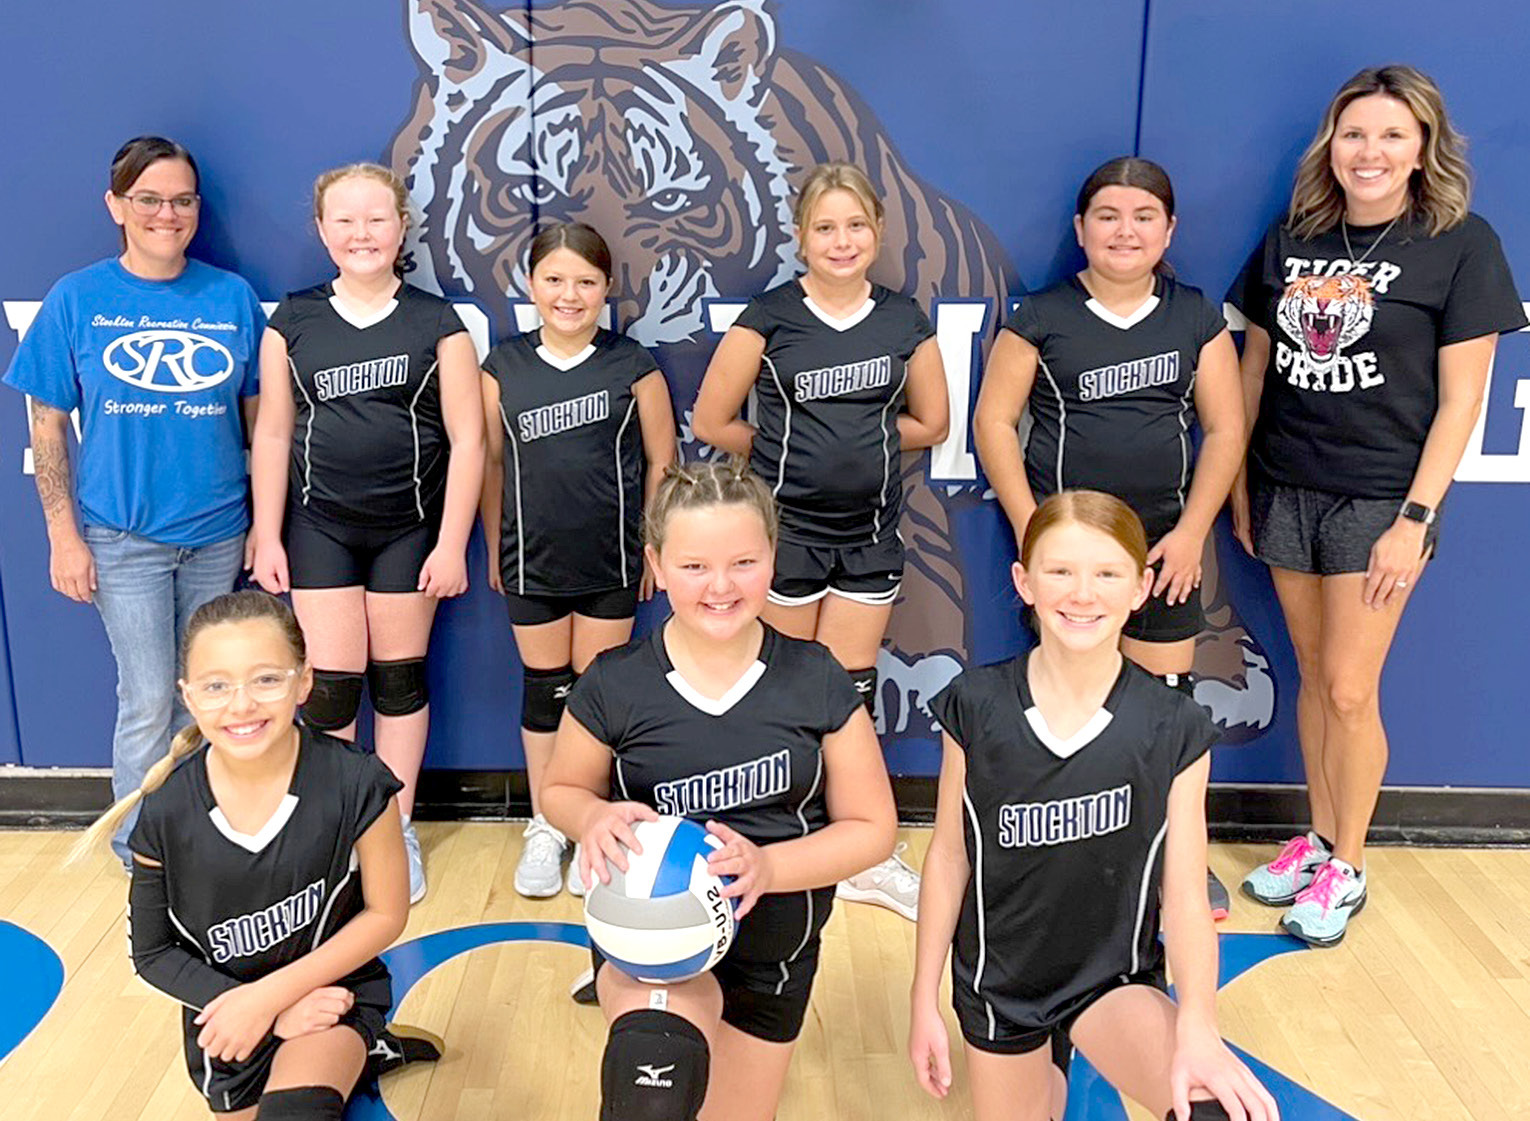 THE STOCKTON REC FIFTH-GRADE VOLLEYBALLTEAM saw plenty of action during their Saturday morning matches throughout September. Pictured are: (front row) Maleigha Horn, Tessa Look, Omree Dibble; (back row) coach Jordan Carpenter, Lily Yohon, Haddie Carpenter, Shelby Thayer, Emilee Brown, and coach Sadie Look.